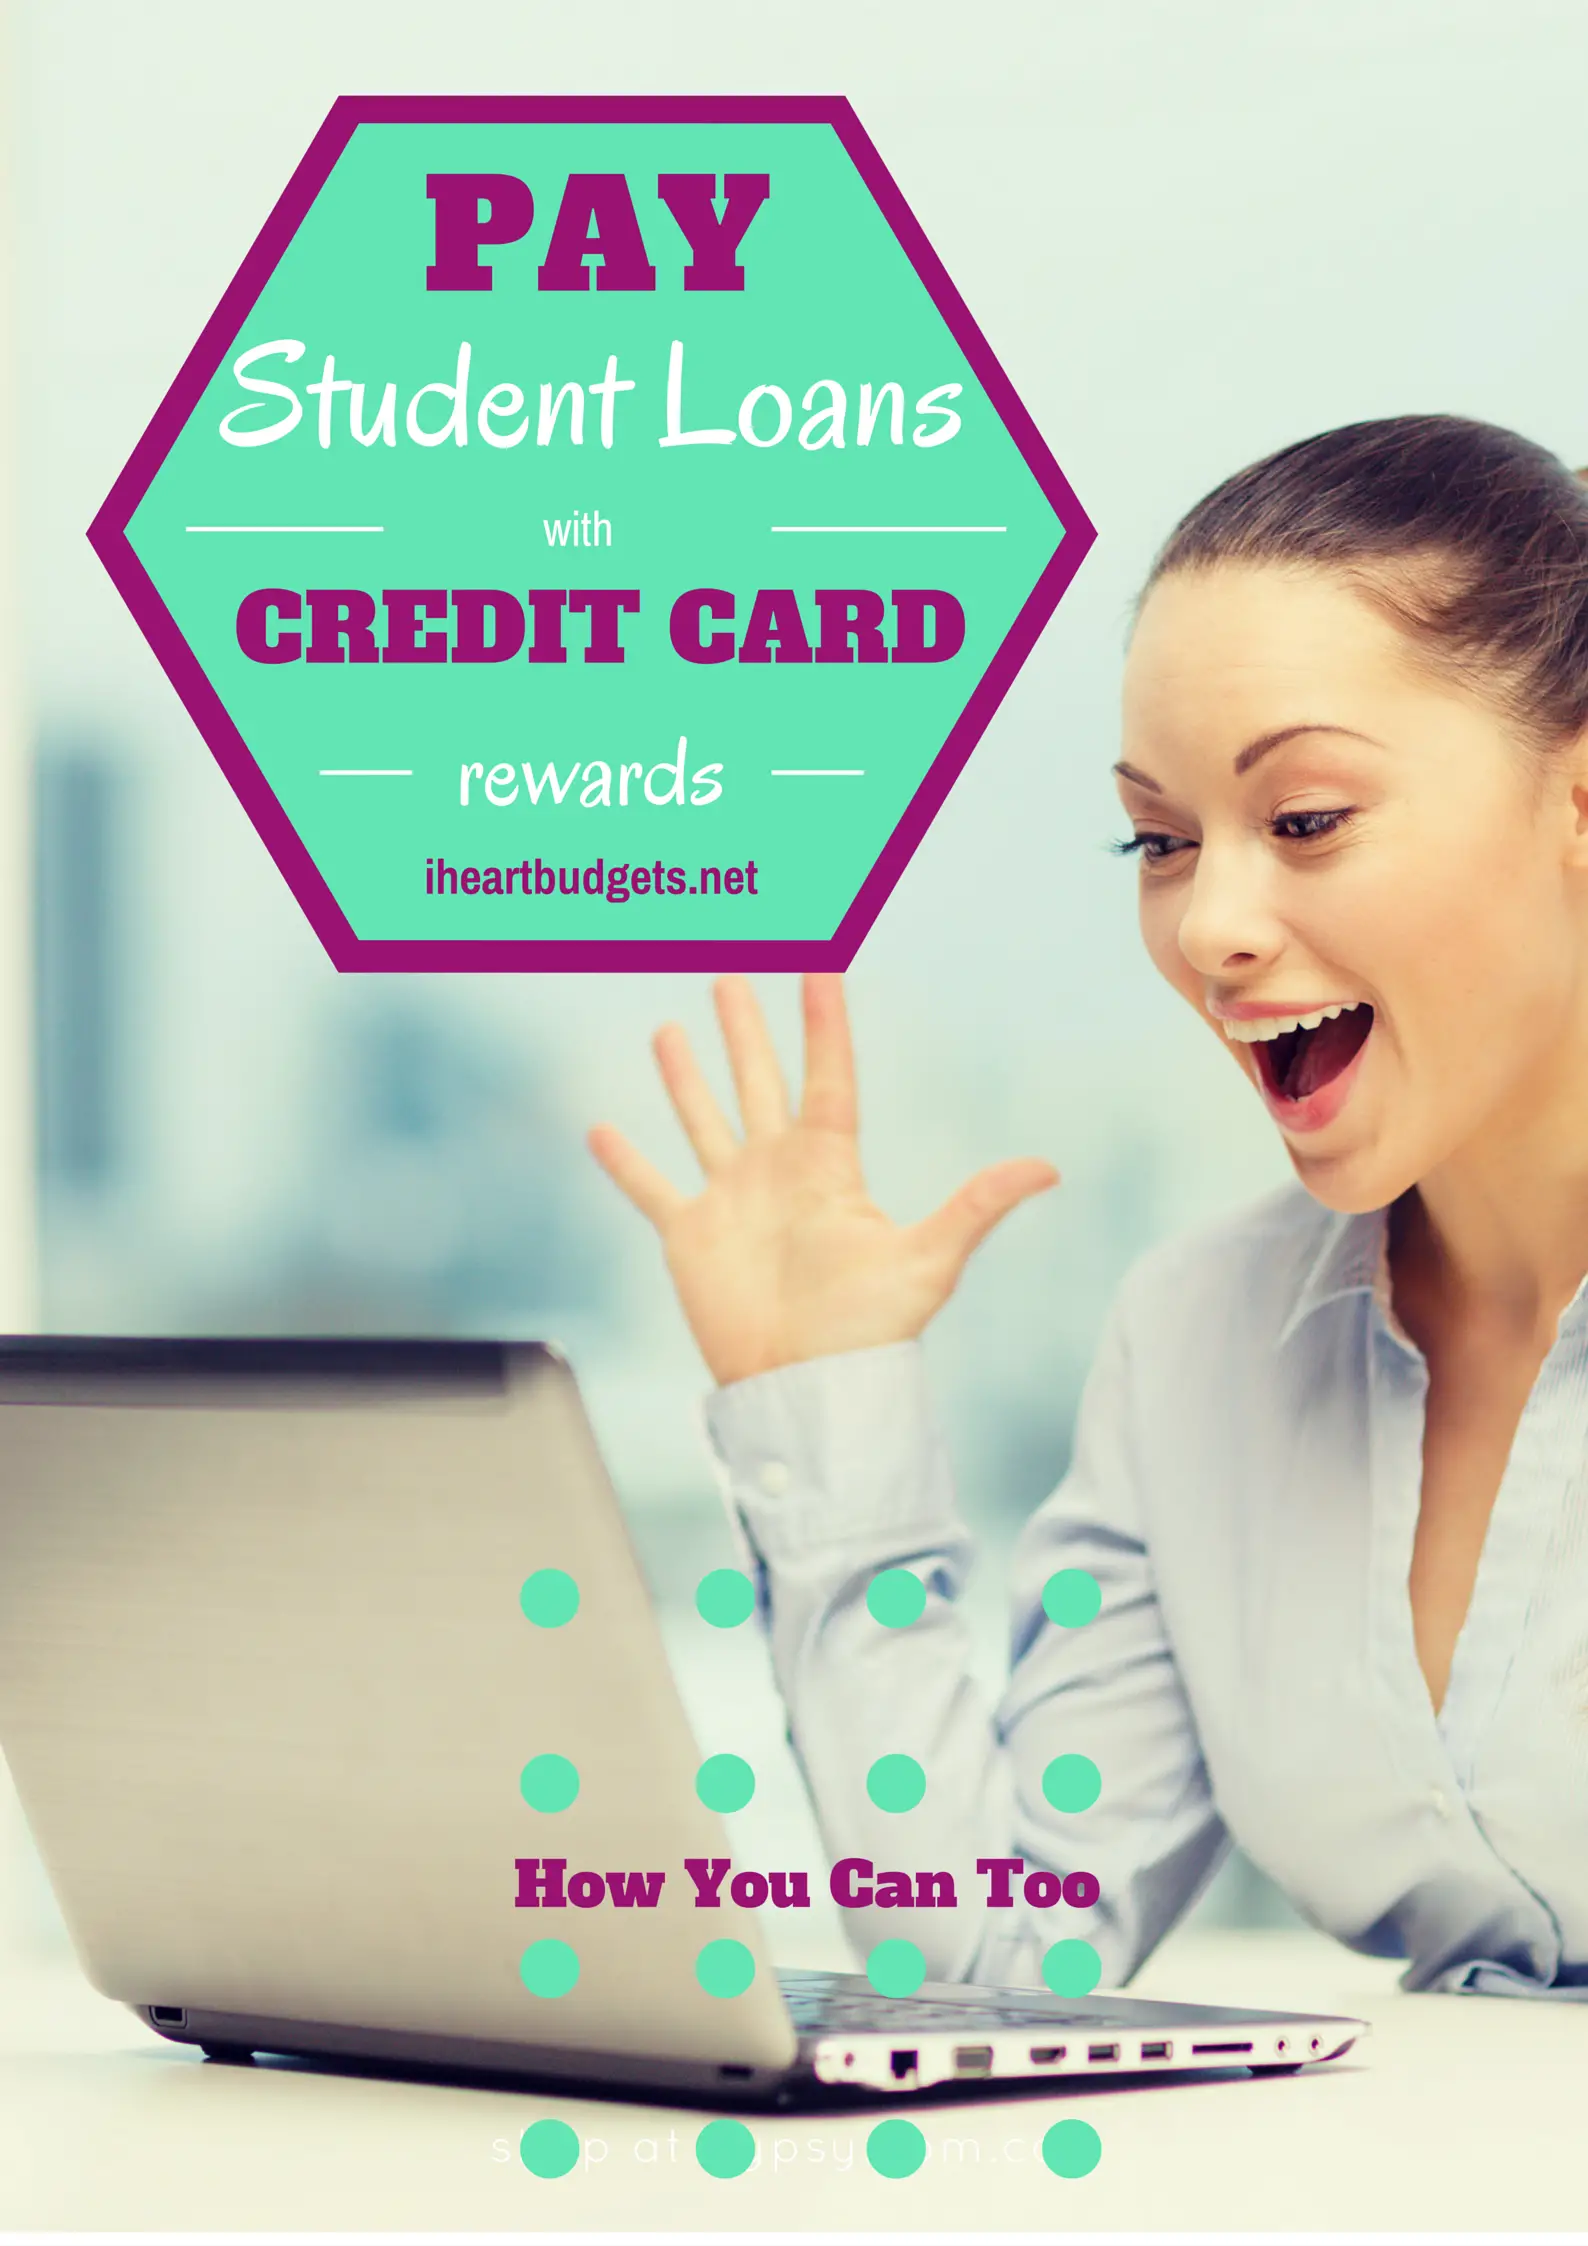 Can I Pay Off Student Loan With Credit Card